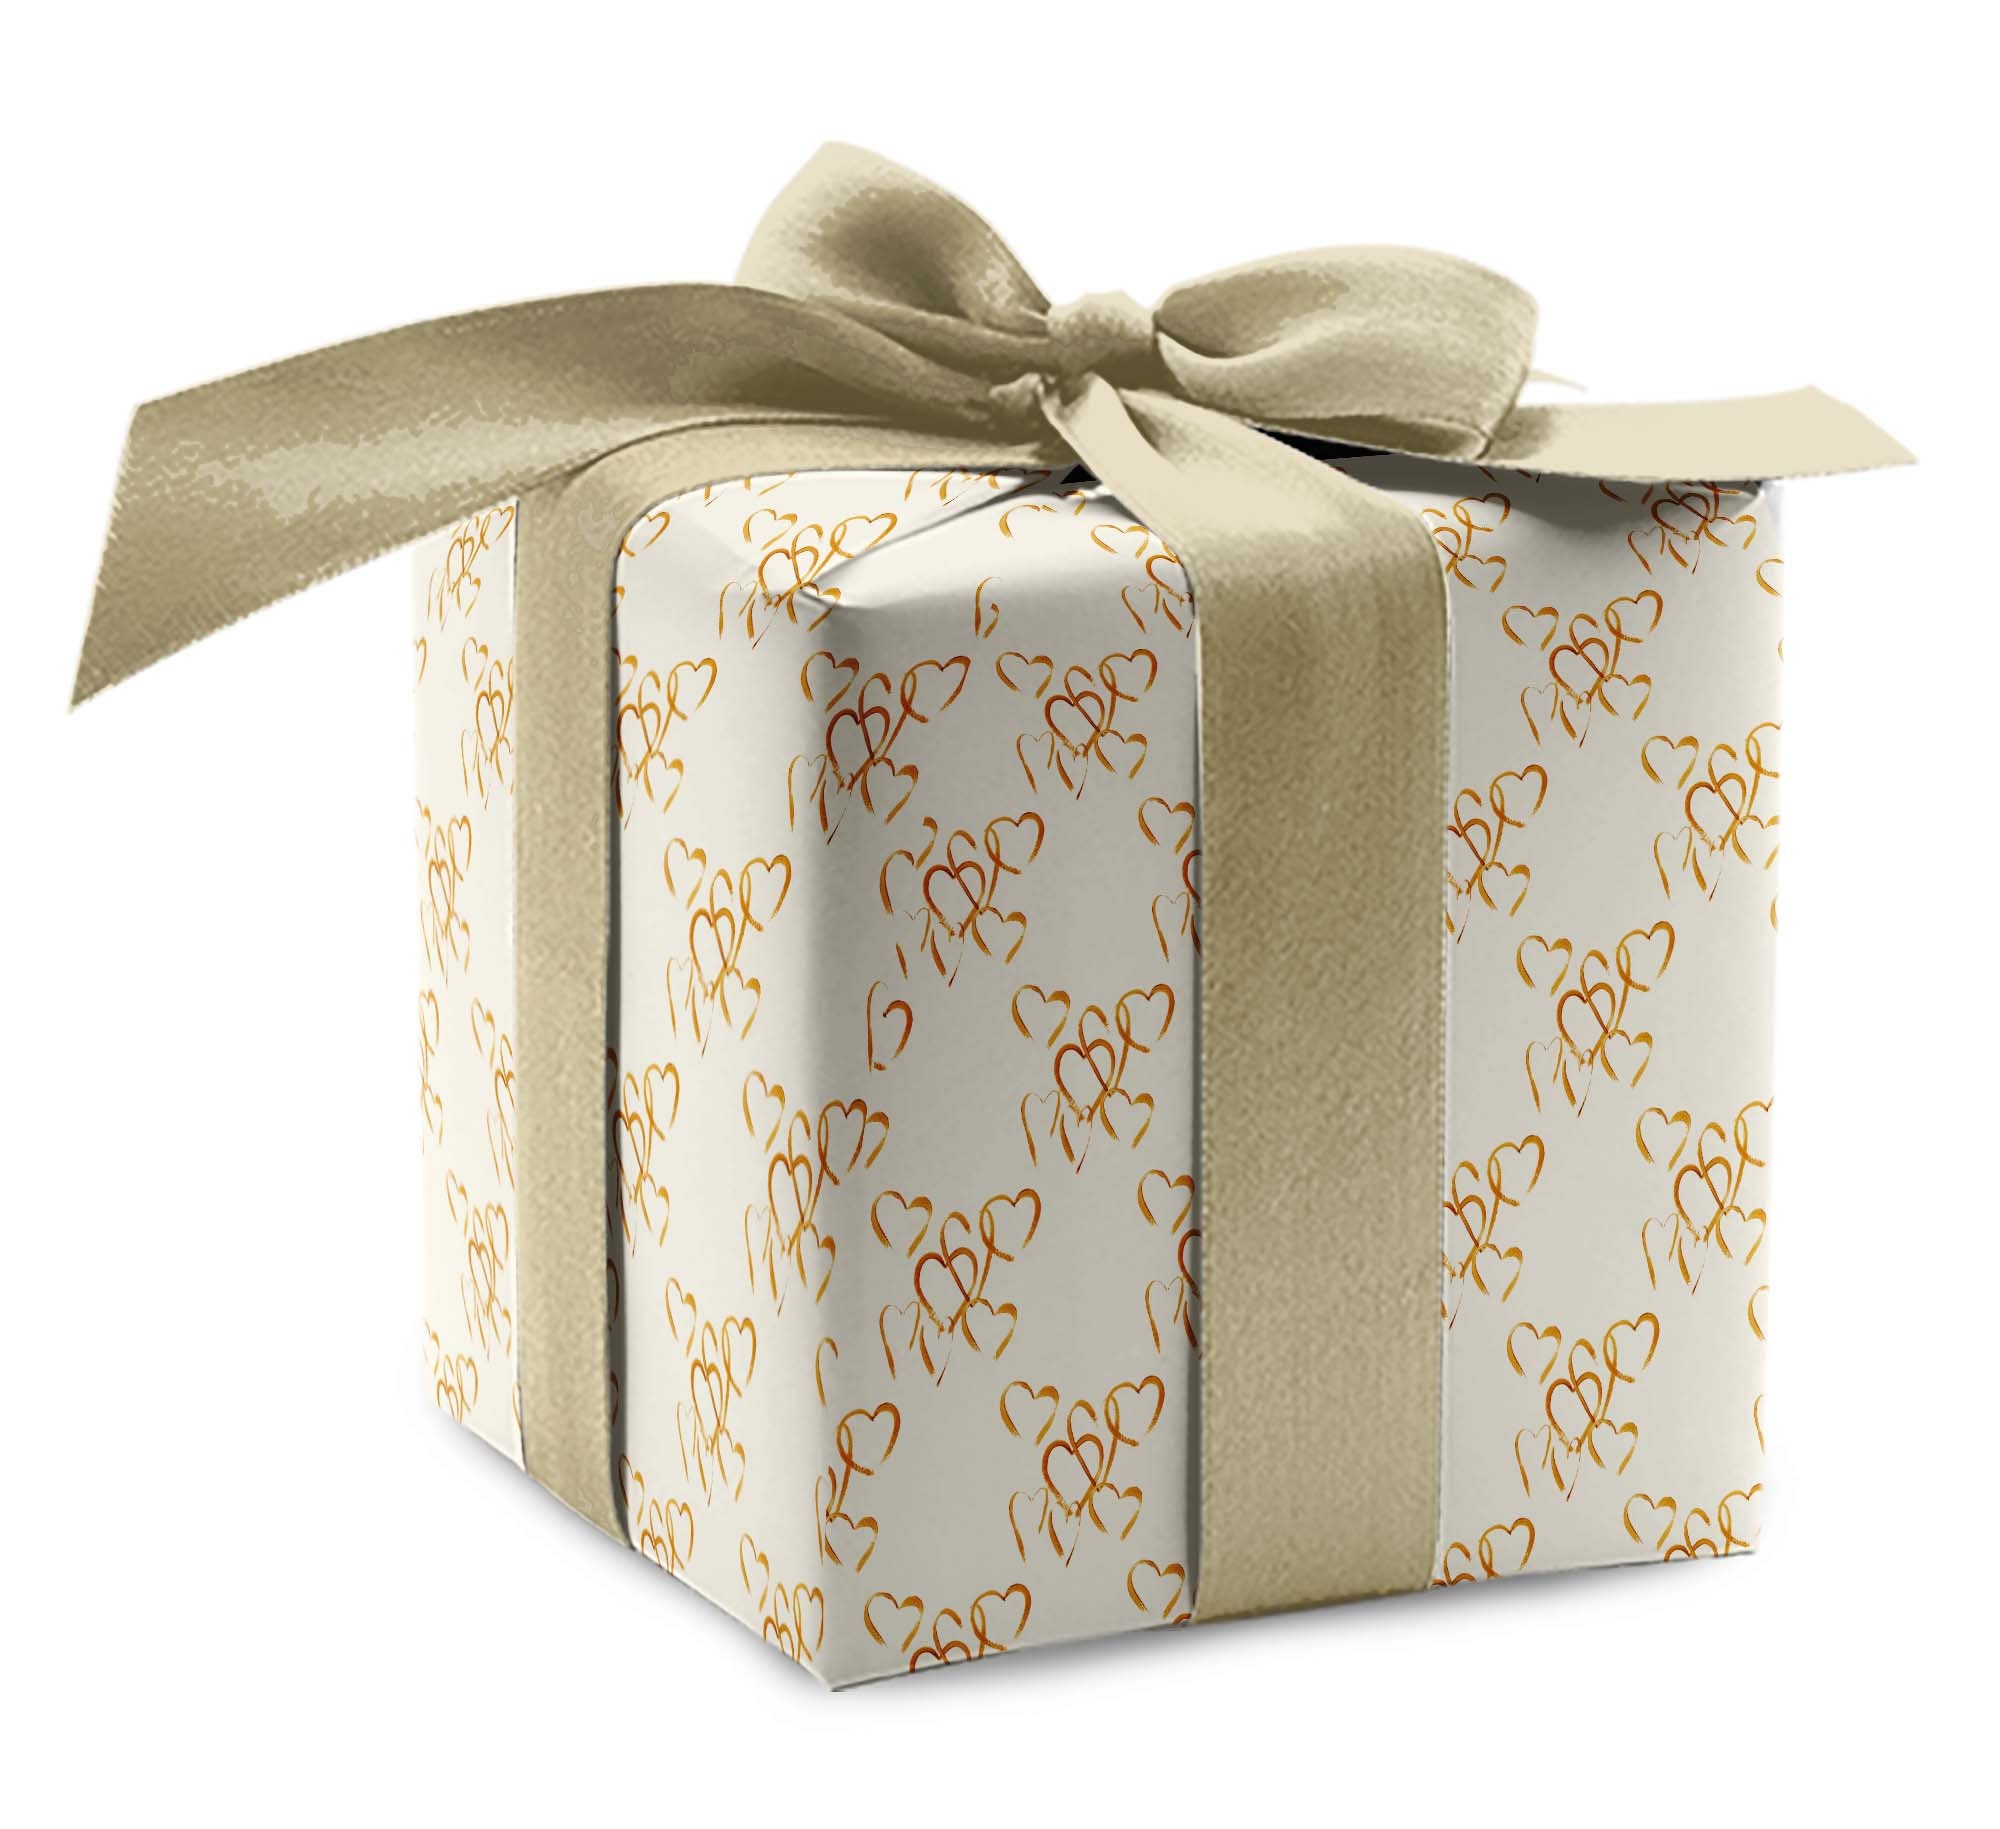 Golden Hearts Gift Wrap, Premium Luxury Thick Wrapping Paper, Love